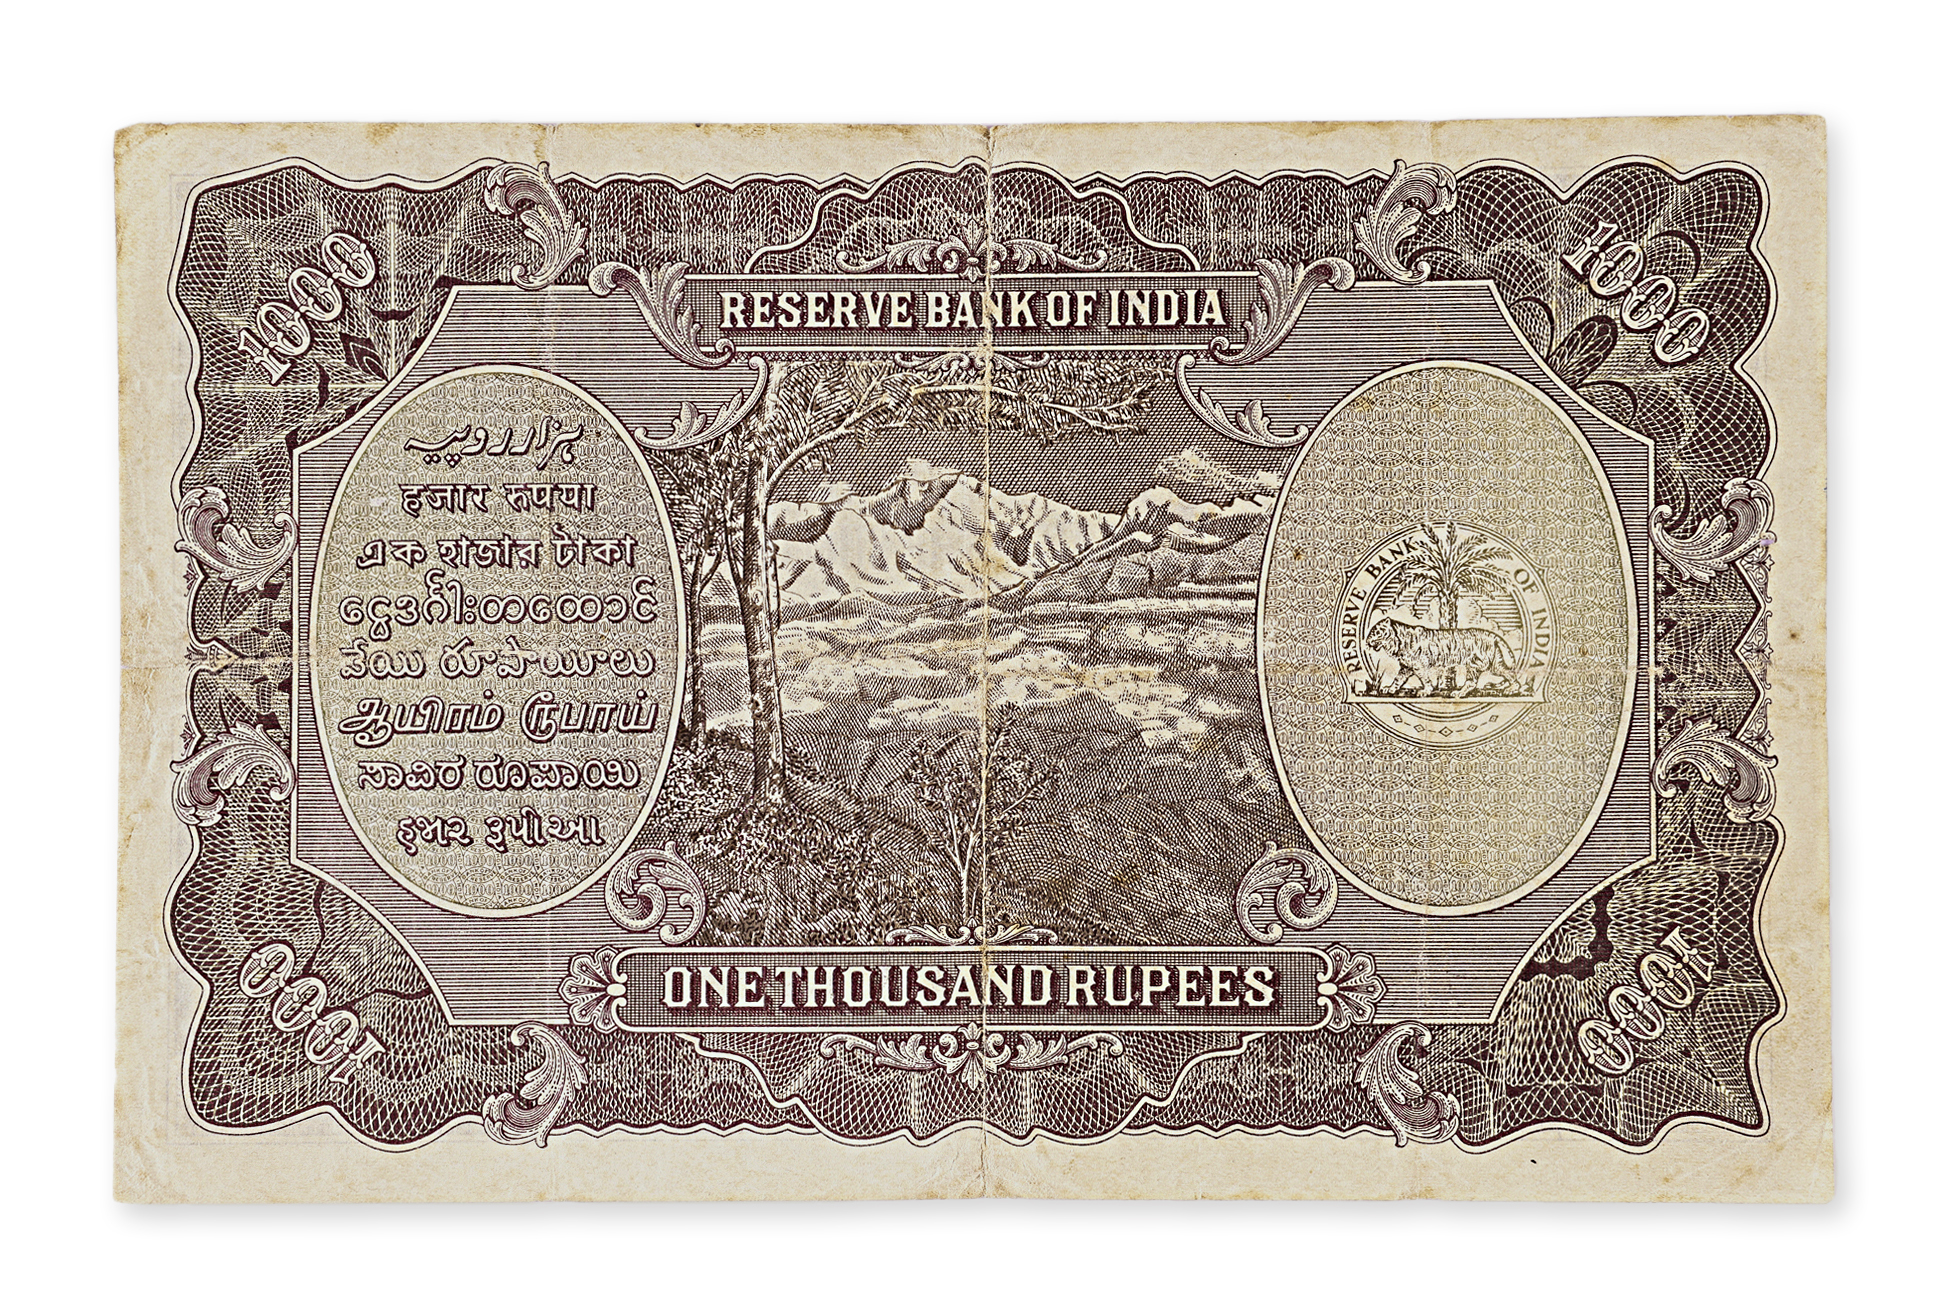 RESERVE BANK OF INDIA GEORGE VI 1000 RUPEES 1937 - Image 2 of 4